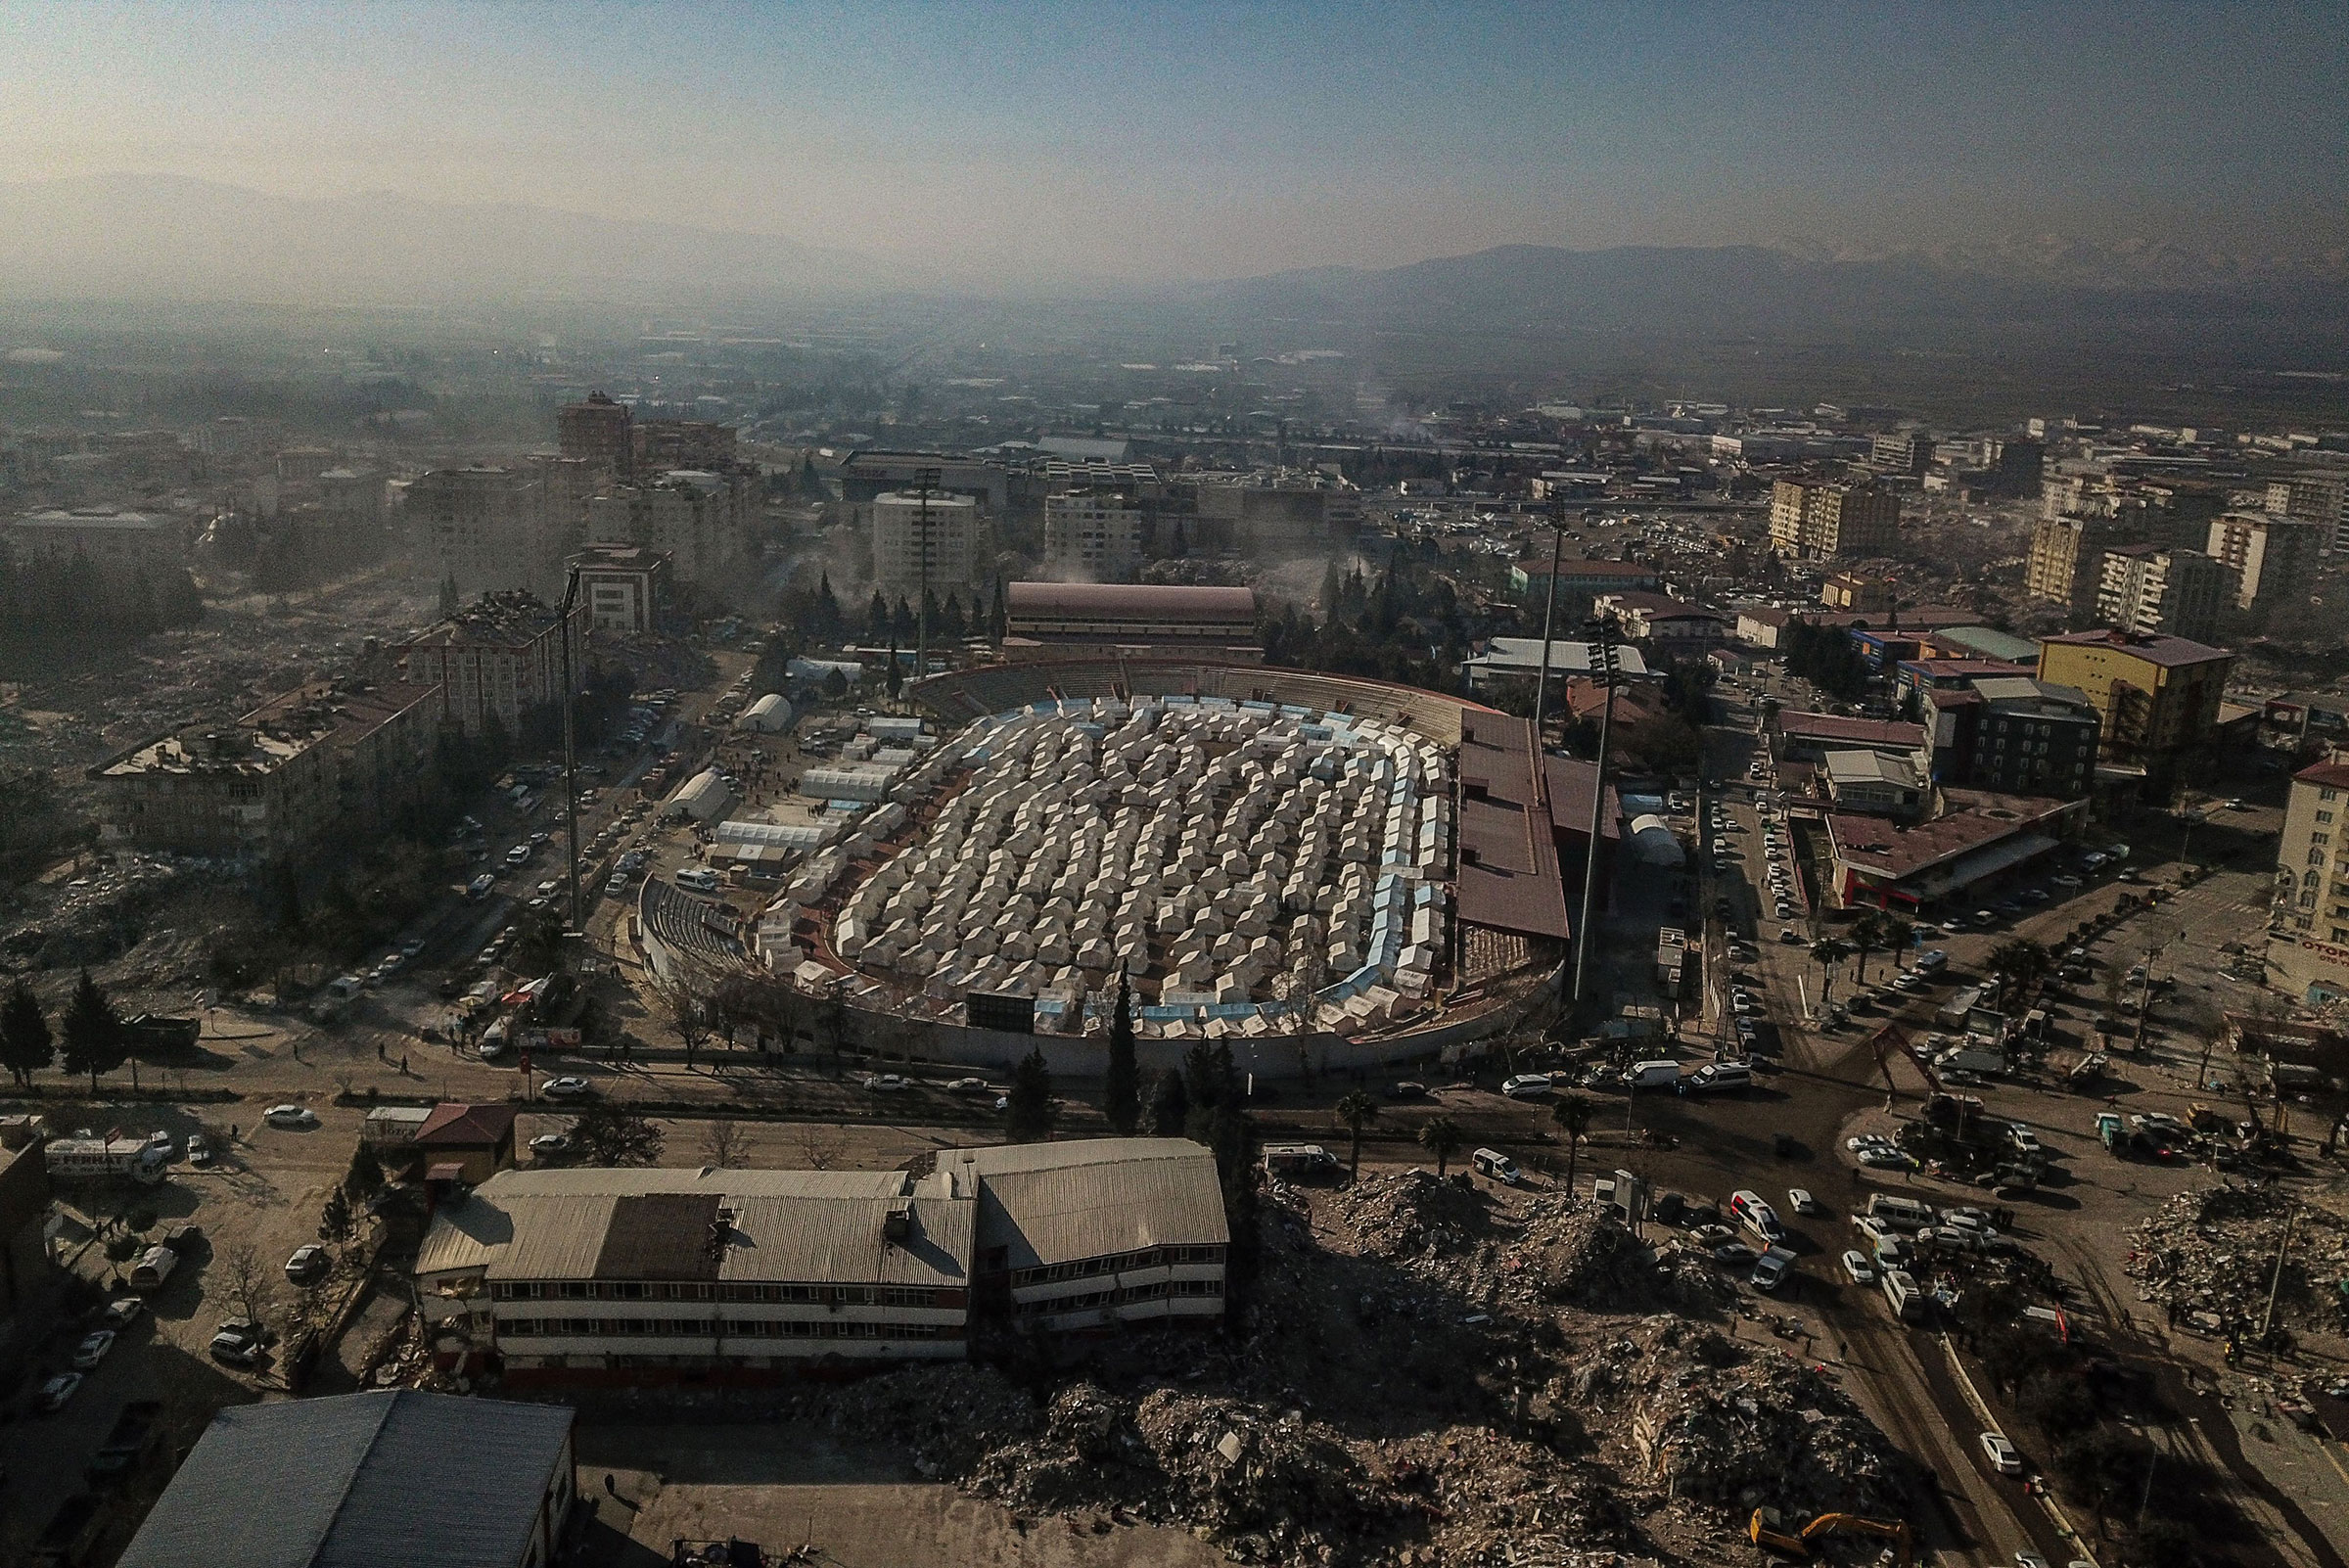 This aerial view shows temporary shelters set up within a stadium amidst collapsed buildings in Kahramanmaras, southeastern Turkey, on Feb. 14, 2023. (Bulent Kilic—AFP/Getty Images)